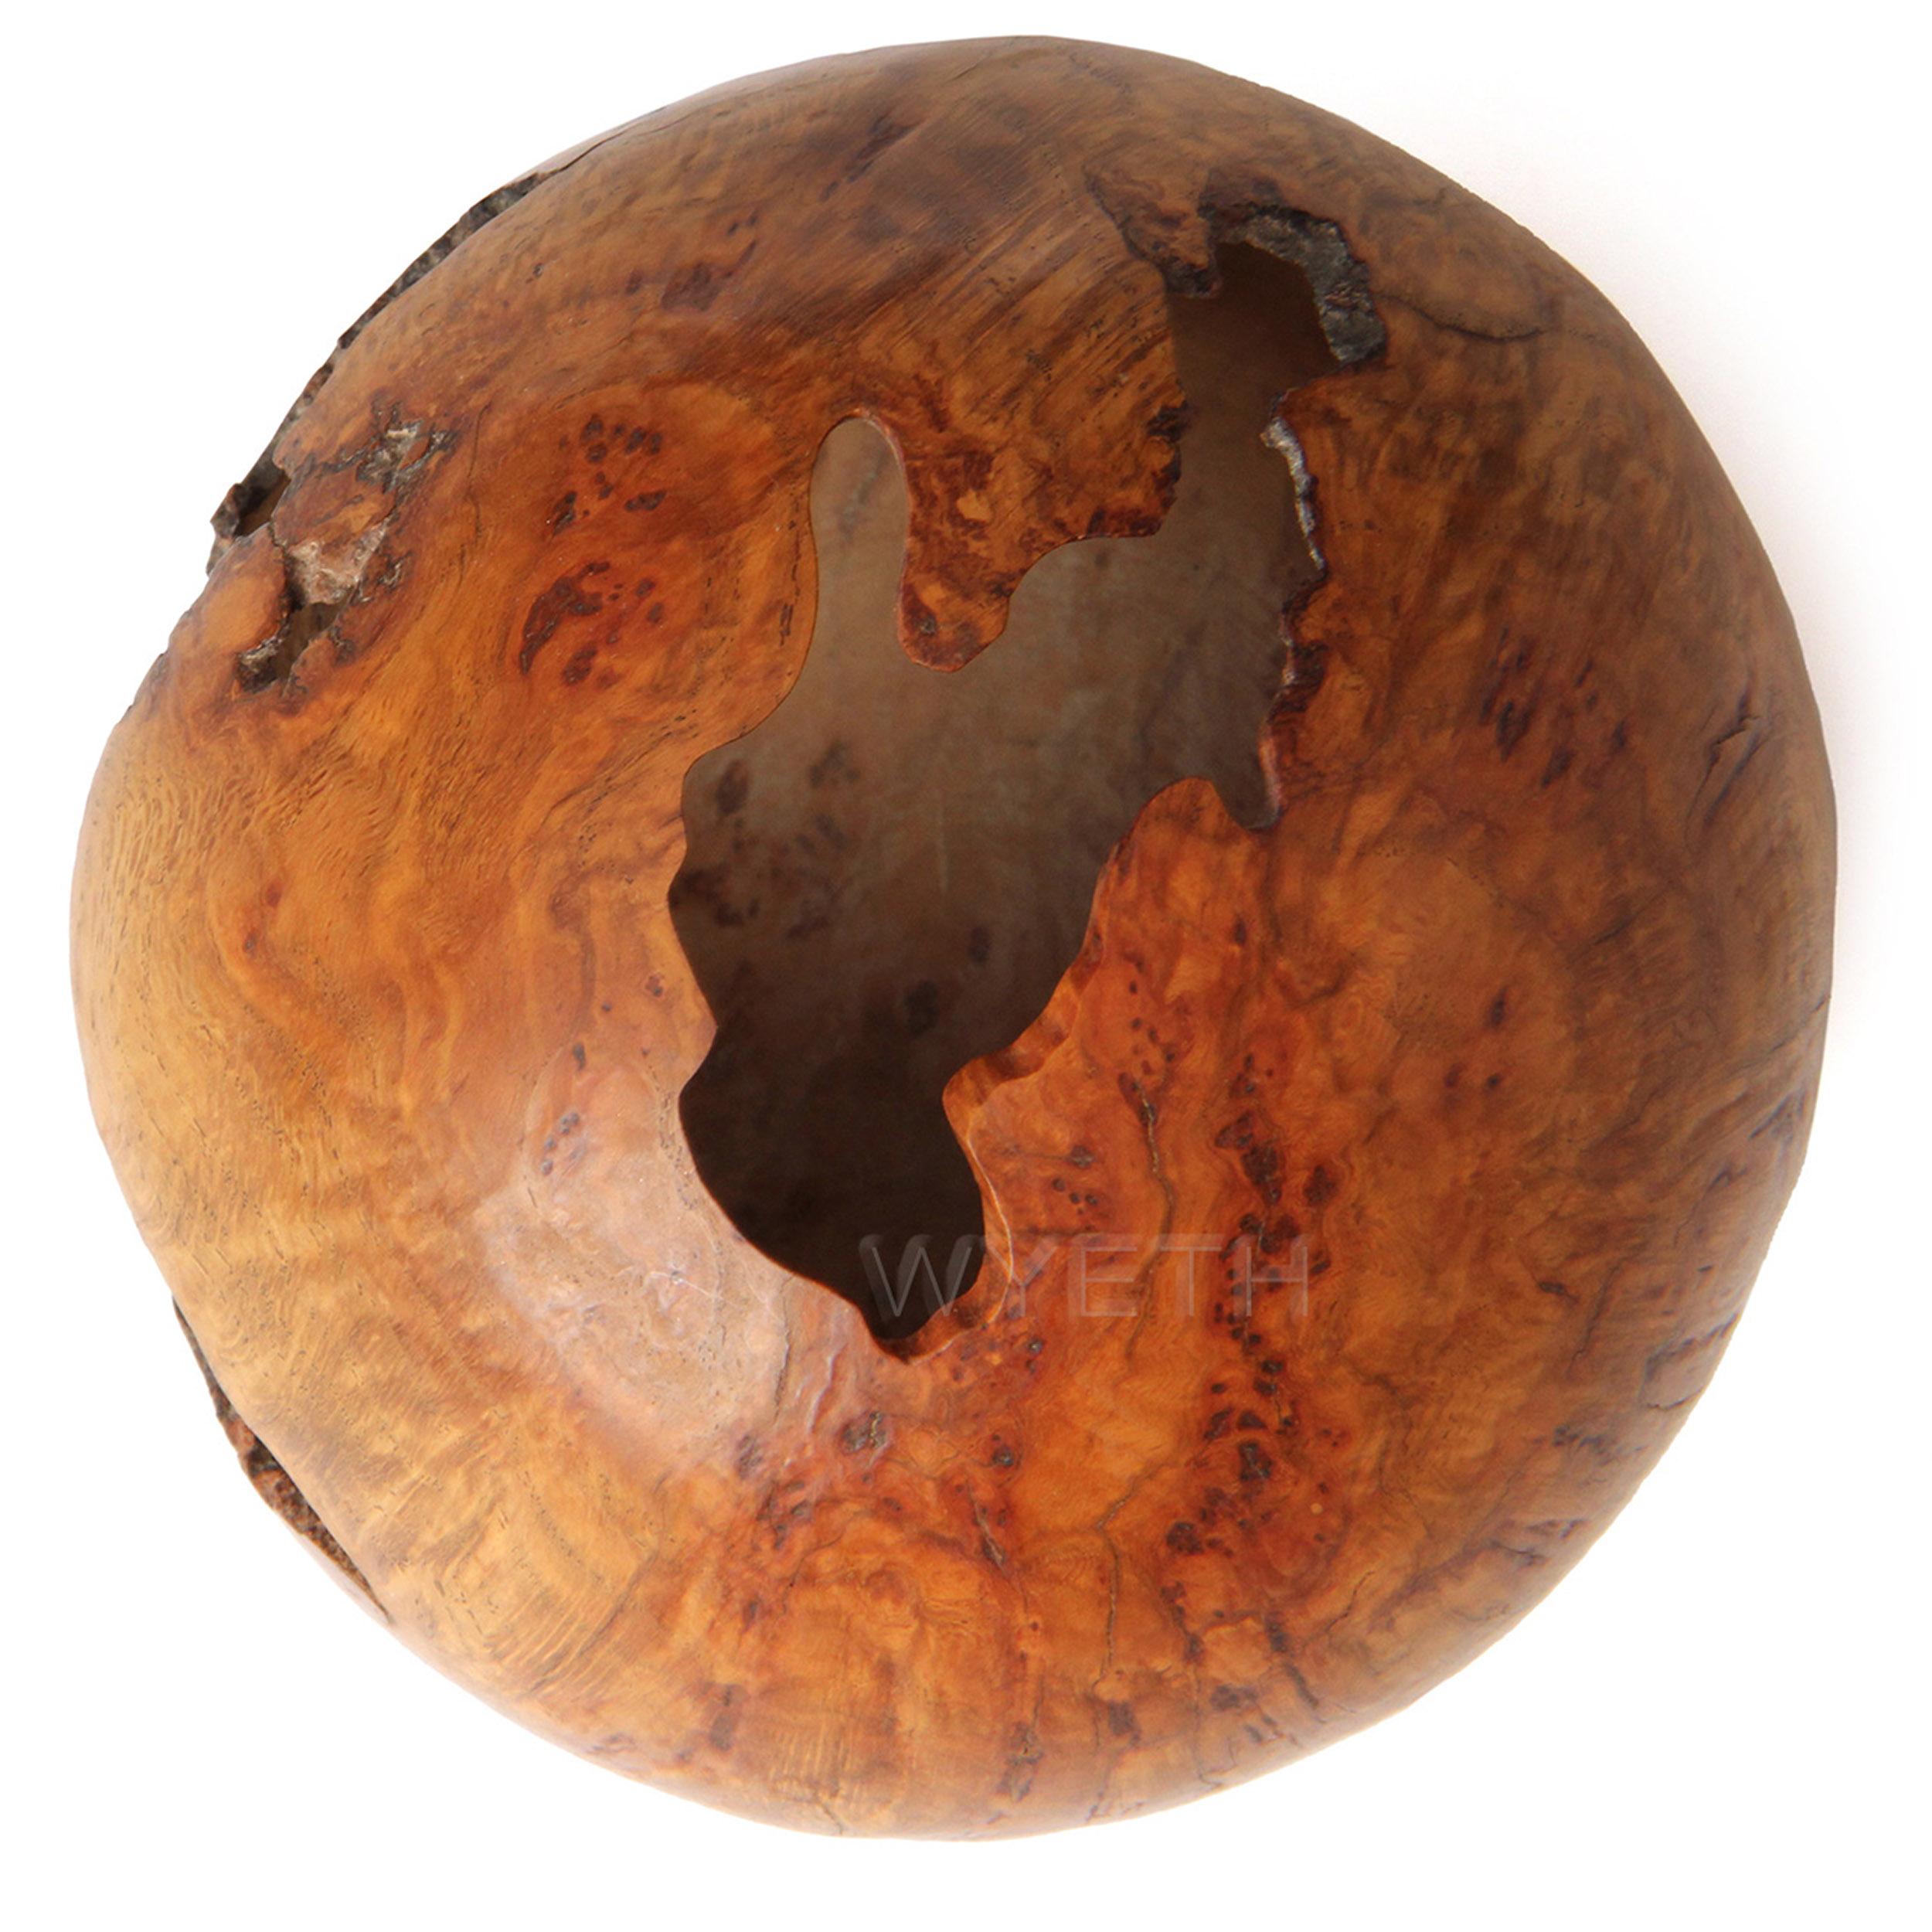 A delicate lathe turned sphere in Red Oak burl with natural occlusions. Signed 